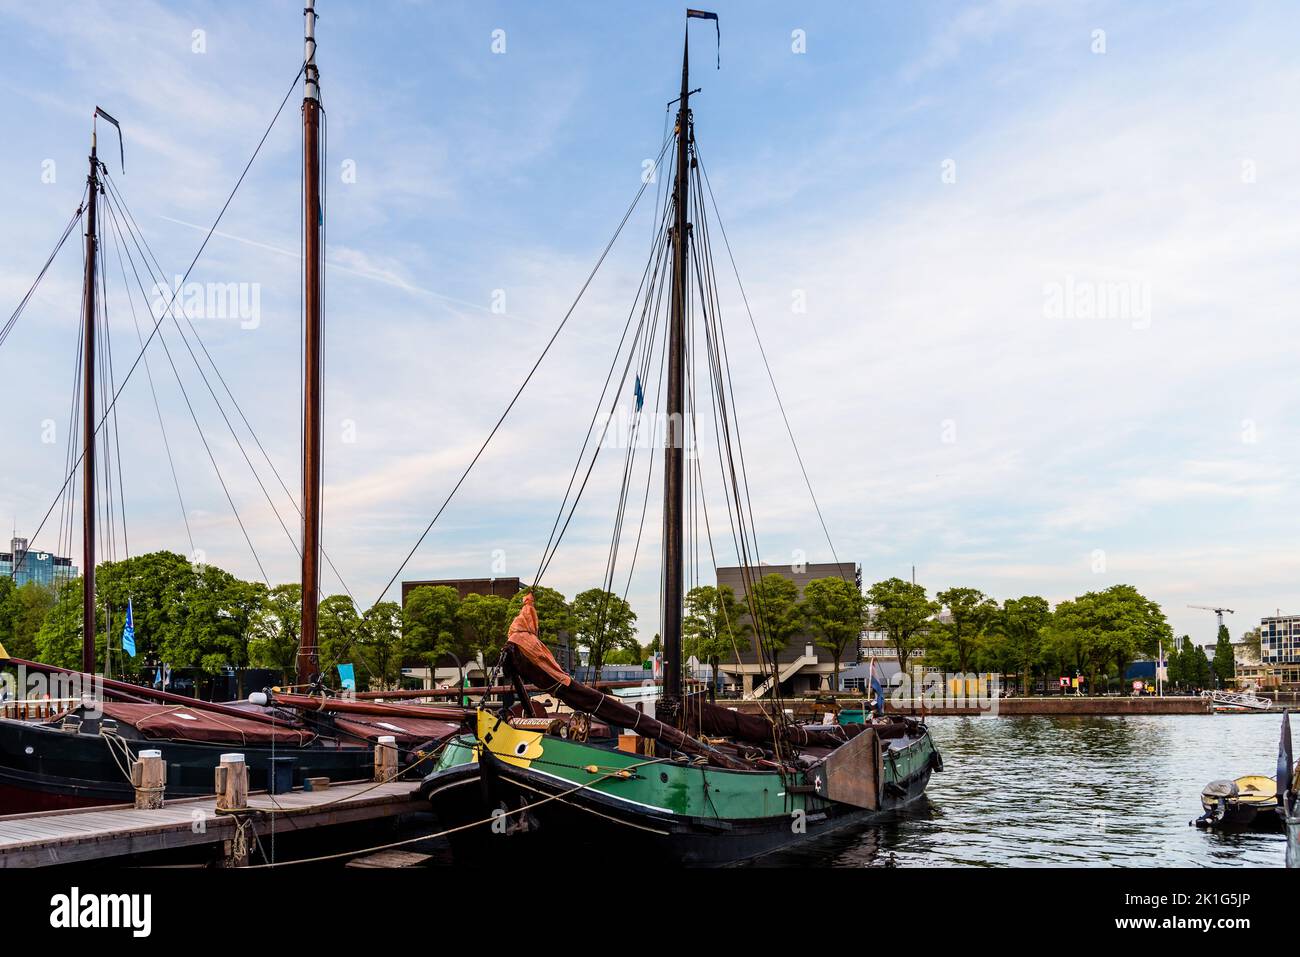 Amsterdam, Netherlands - May 6, 2022: Old wooden vessels moored in the Society Museum Harbor Amsterdam or Vereniging Museumhaven Amsterdam Stock Photo